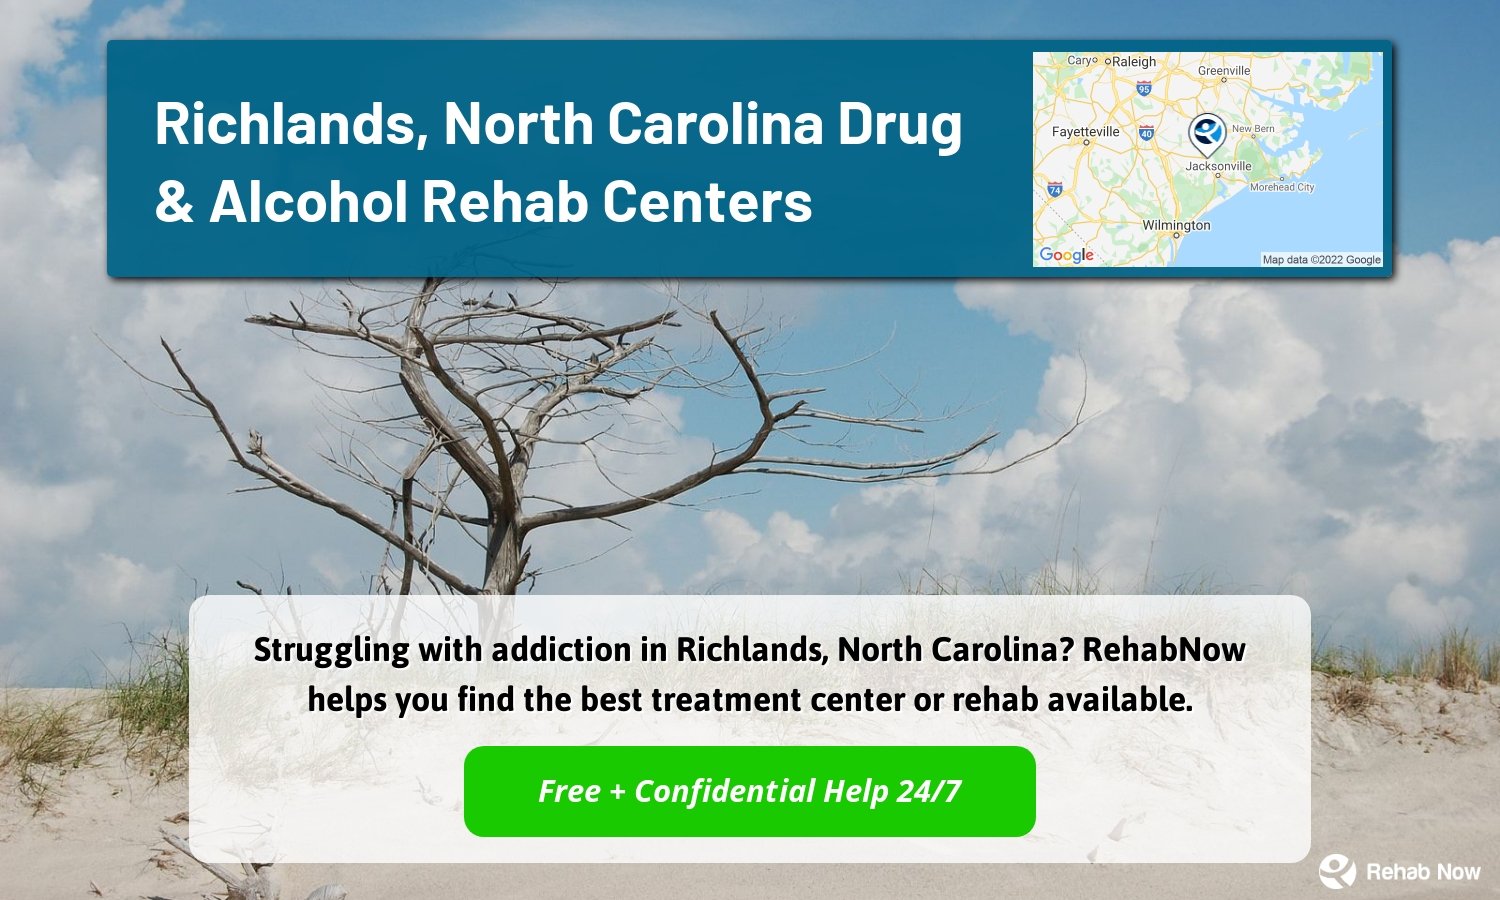 Struggling with addiction in Richlands, North Carolina? RehabNow helps you find the best treatment center or rehab available.